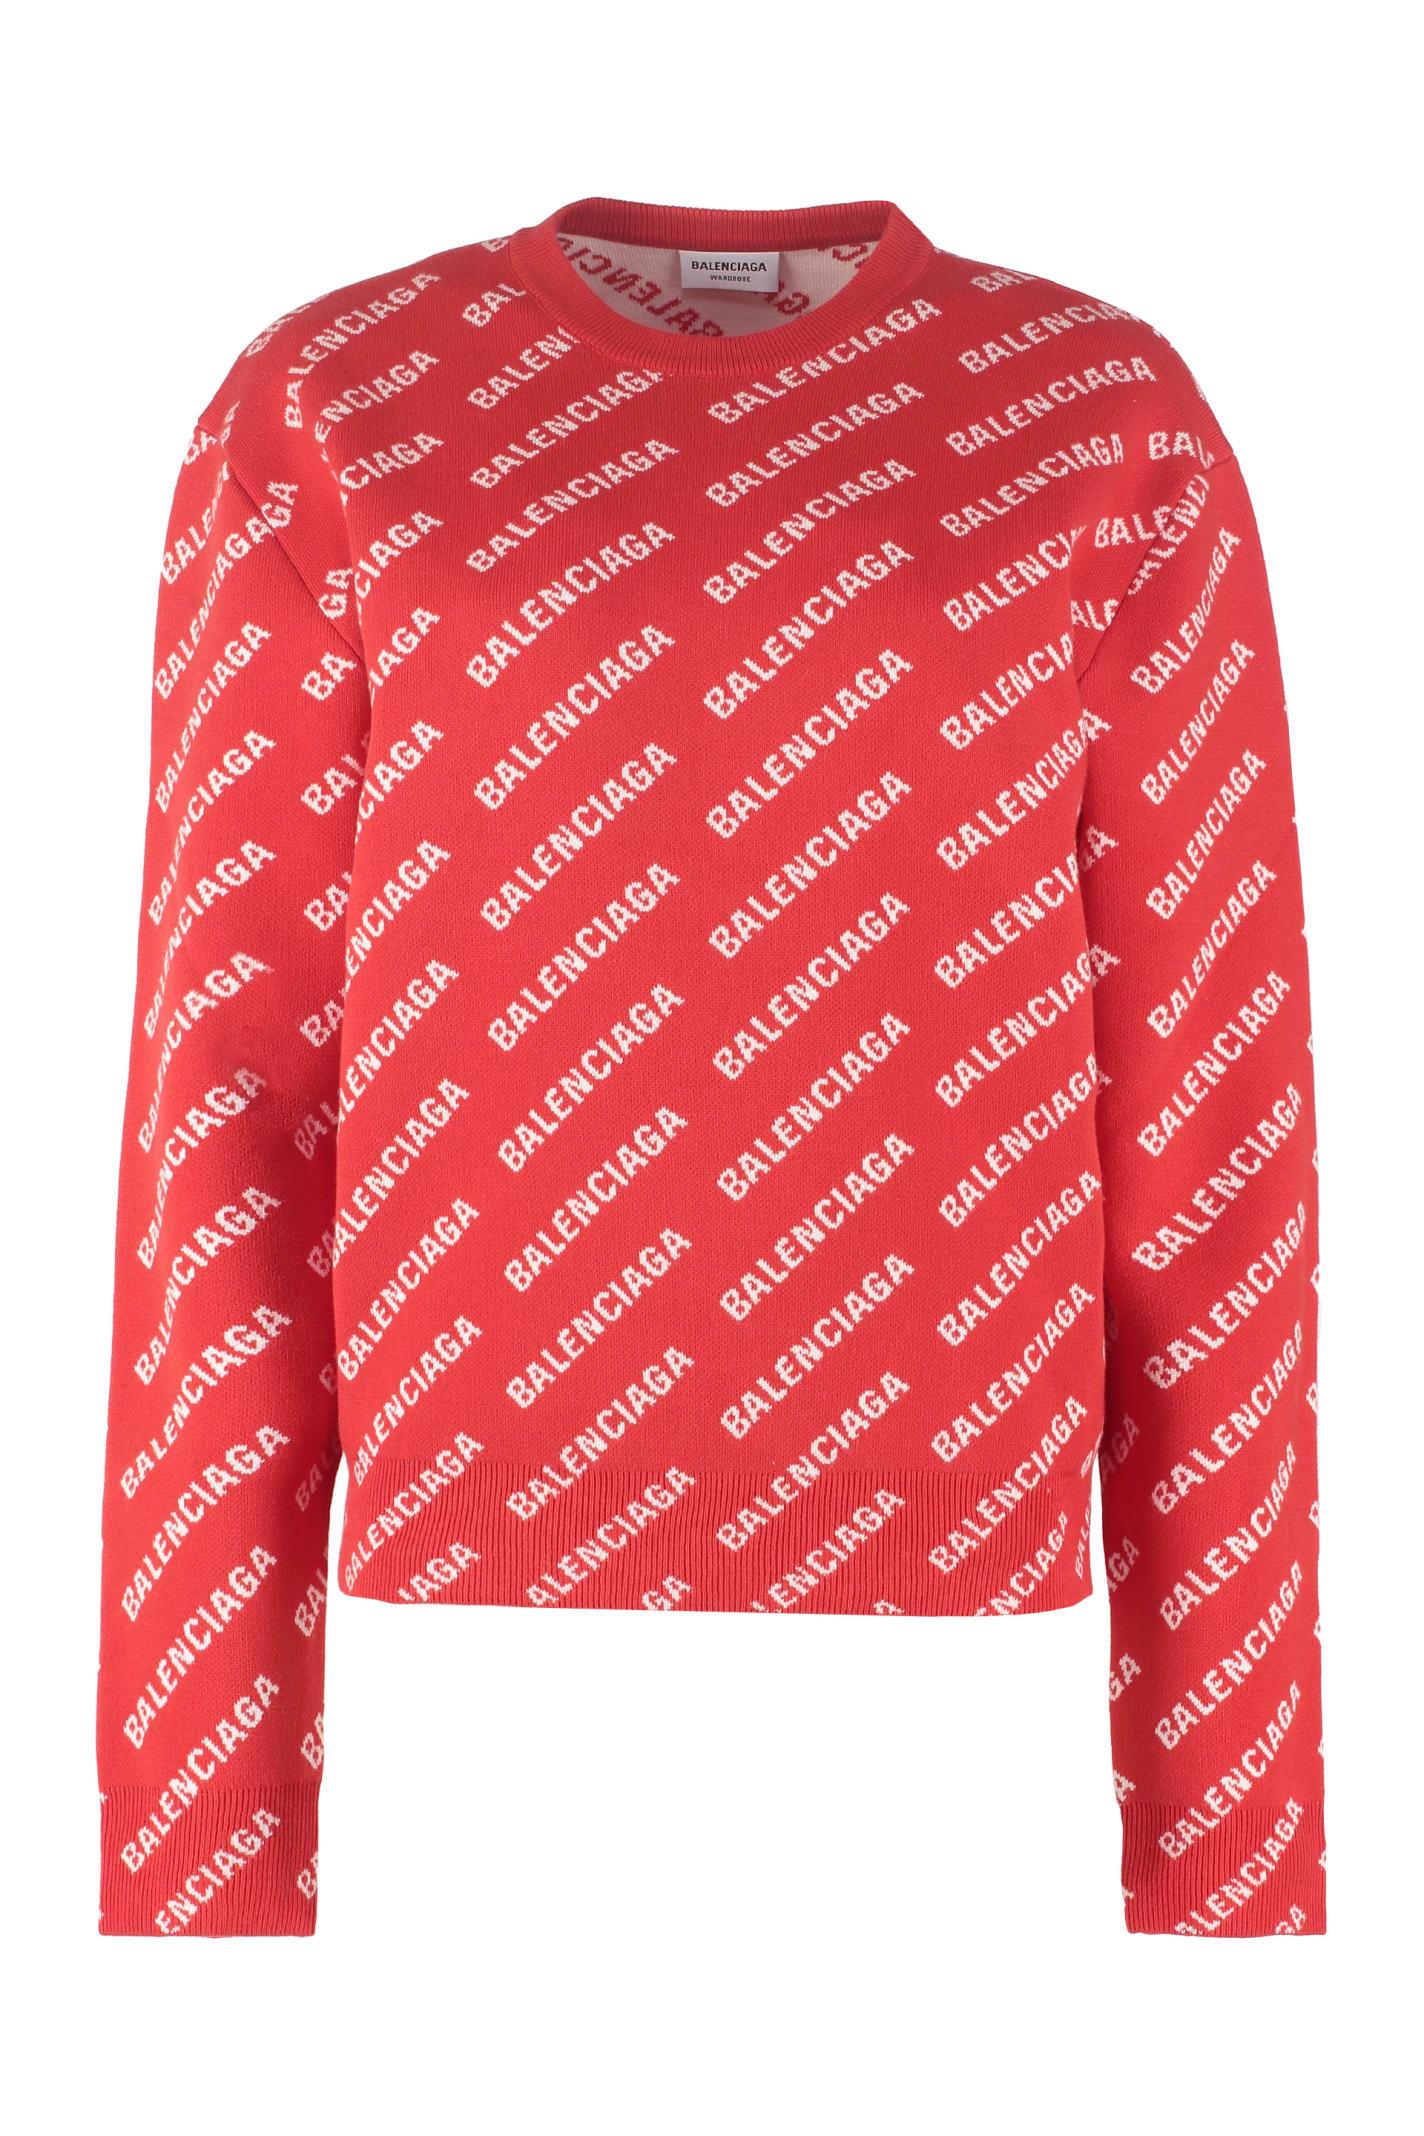 Balenciaga All-over Logo Crew-neck Sweater in Red | Lyst